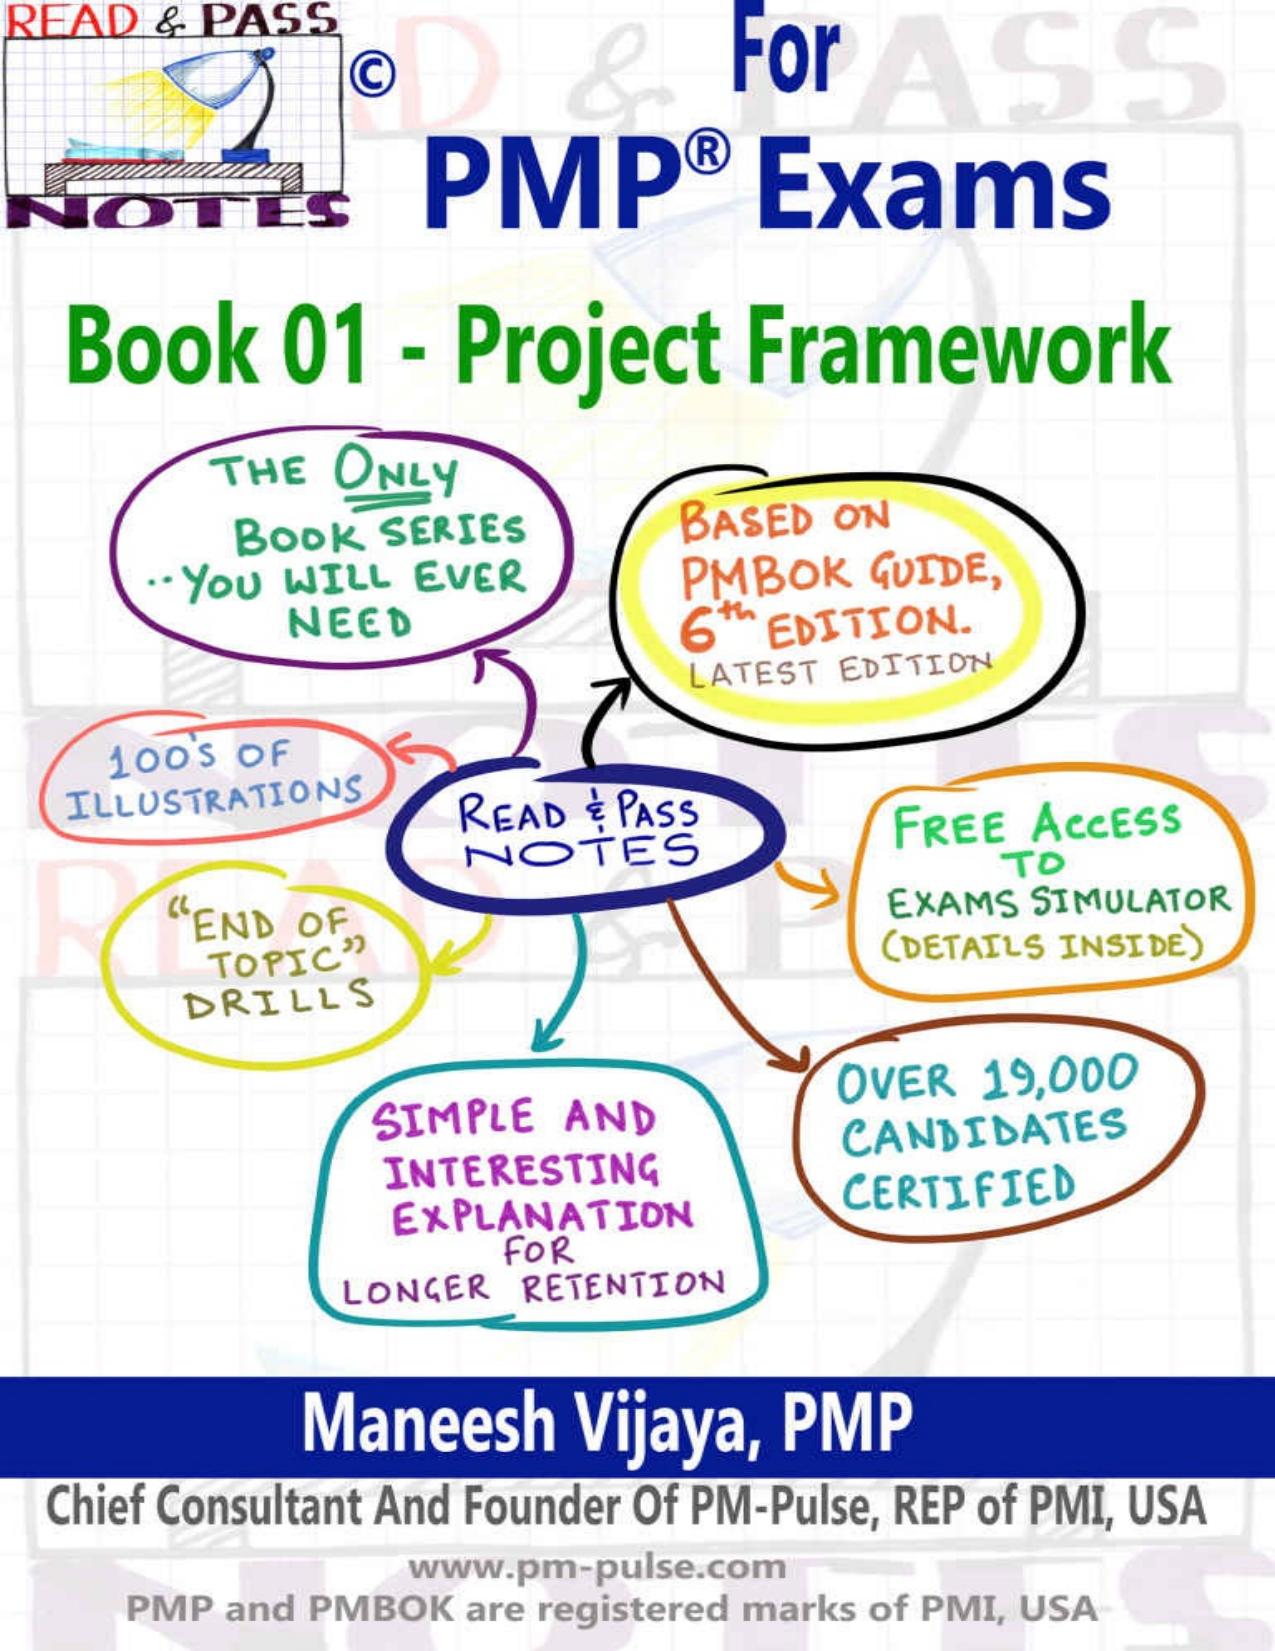 Read and Pass Notes for PMP® Exams (Based on PMBOK® Guide 6th Edition): The Right Way to Clear PMP® Exams